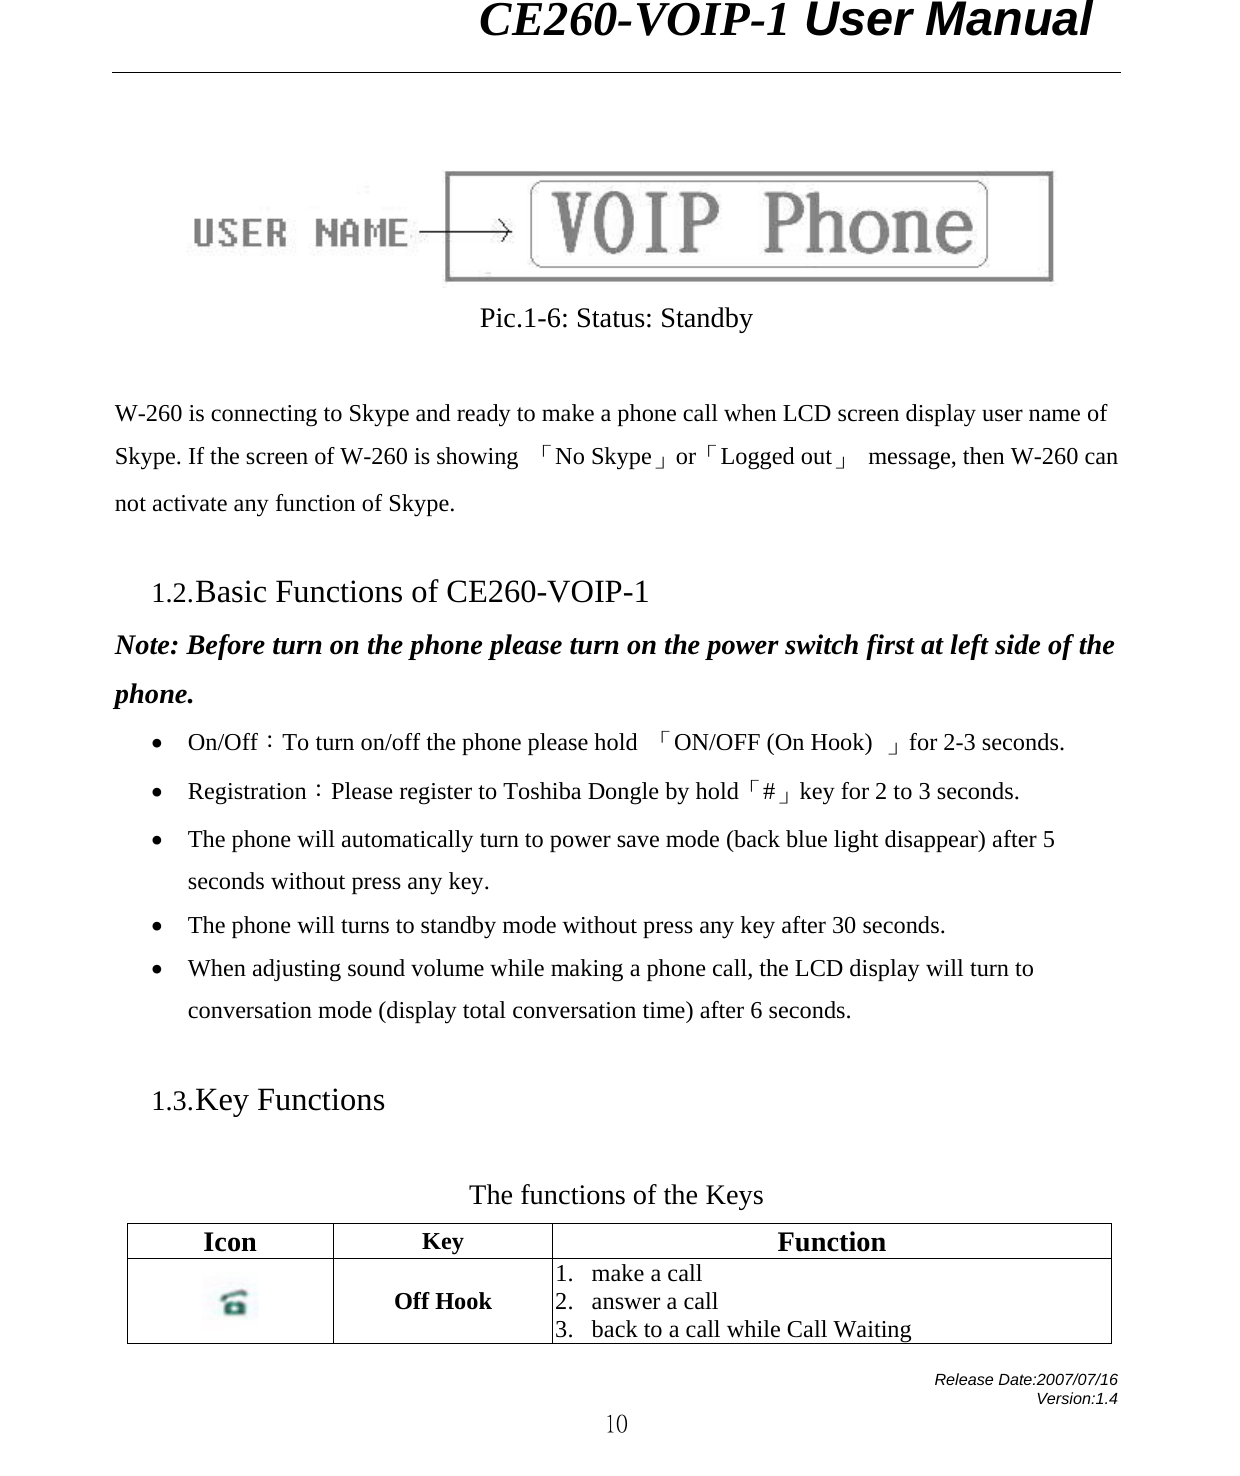                CE260-VOIP-1 User Manual   Release Date:2007/07/16 Version:1.4 10   Pic.1-6: Status: Standby  W-260 is connecting to Skype and ready to make a phone call when LCD screen display user name of Skype. If the screen of W-260 is showing  「No Skype」or「Logged out」 message, then W-260 can not activate any function of Skype.      1.2. Basic Functions of CE260-VOIP-1 Note: Before turn on the phone please turn on the power switch first at left side of the phone.  • On/Off：To turn on/off the phone please hold  「ON/OFF (On Hook)  」for 2-3 seconds. • Registration：Please register to Toshiba Dongle by hold「#」key for 2 to 3 seconds.   • The phone will automatically turn to power save mode (back blue light disappear) after 5 seconds without press any key. • The phone will turns to standby mode without press any key after 30 seconds. • When adjusting sound volume while making a phone call, the LCD display will turn to conversation mode (display total conversation time) after 6 seconds.  1.3. Key Functions  The functions of the Keys     Icon  Key  Function  Off Hook  1. make a call 2. answer a call 3. back to a call while Call Waiting   